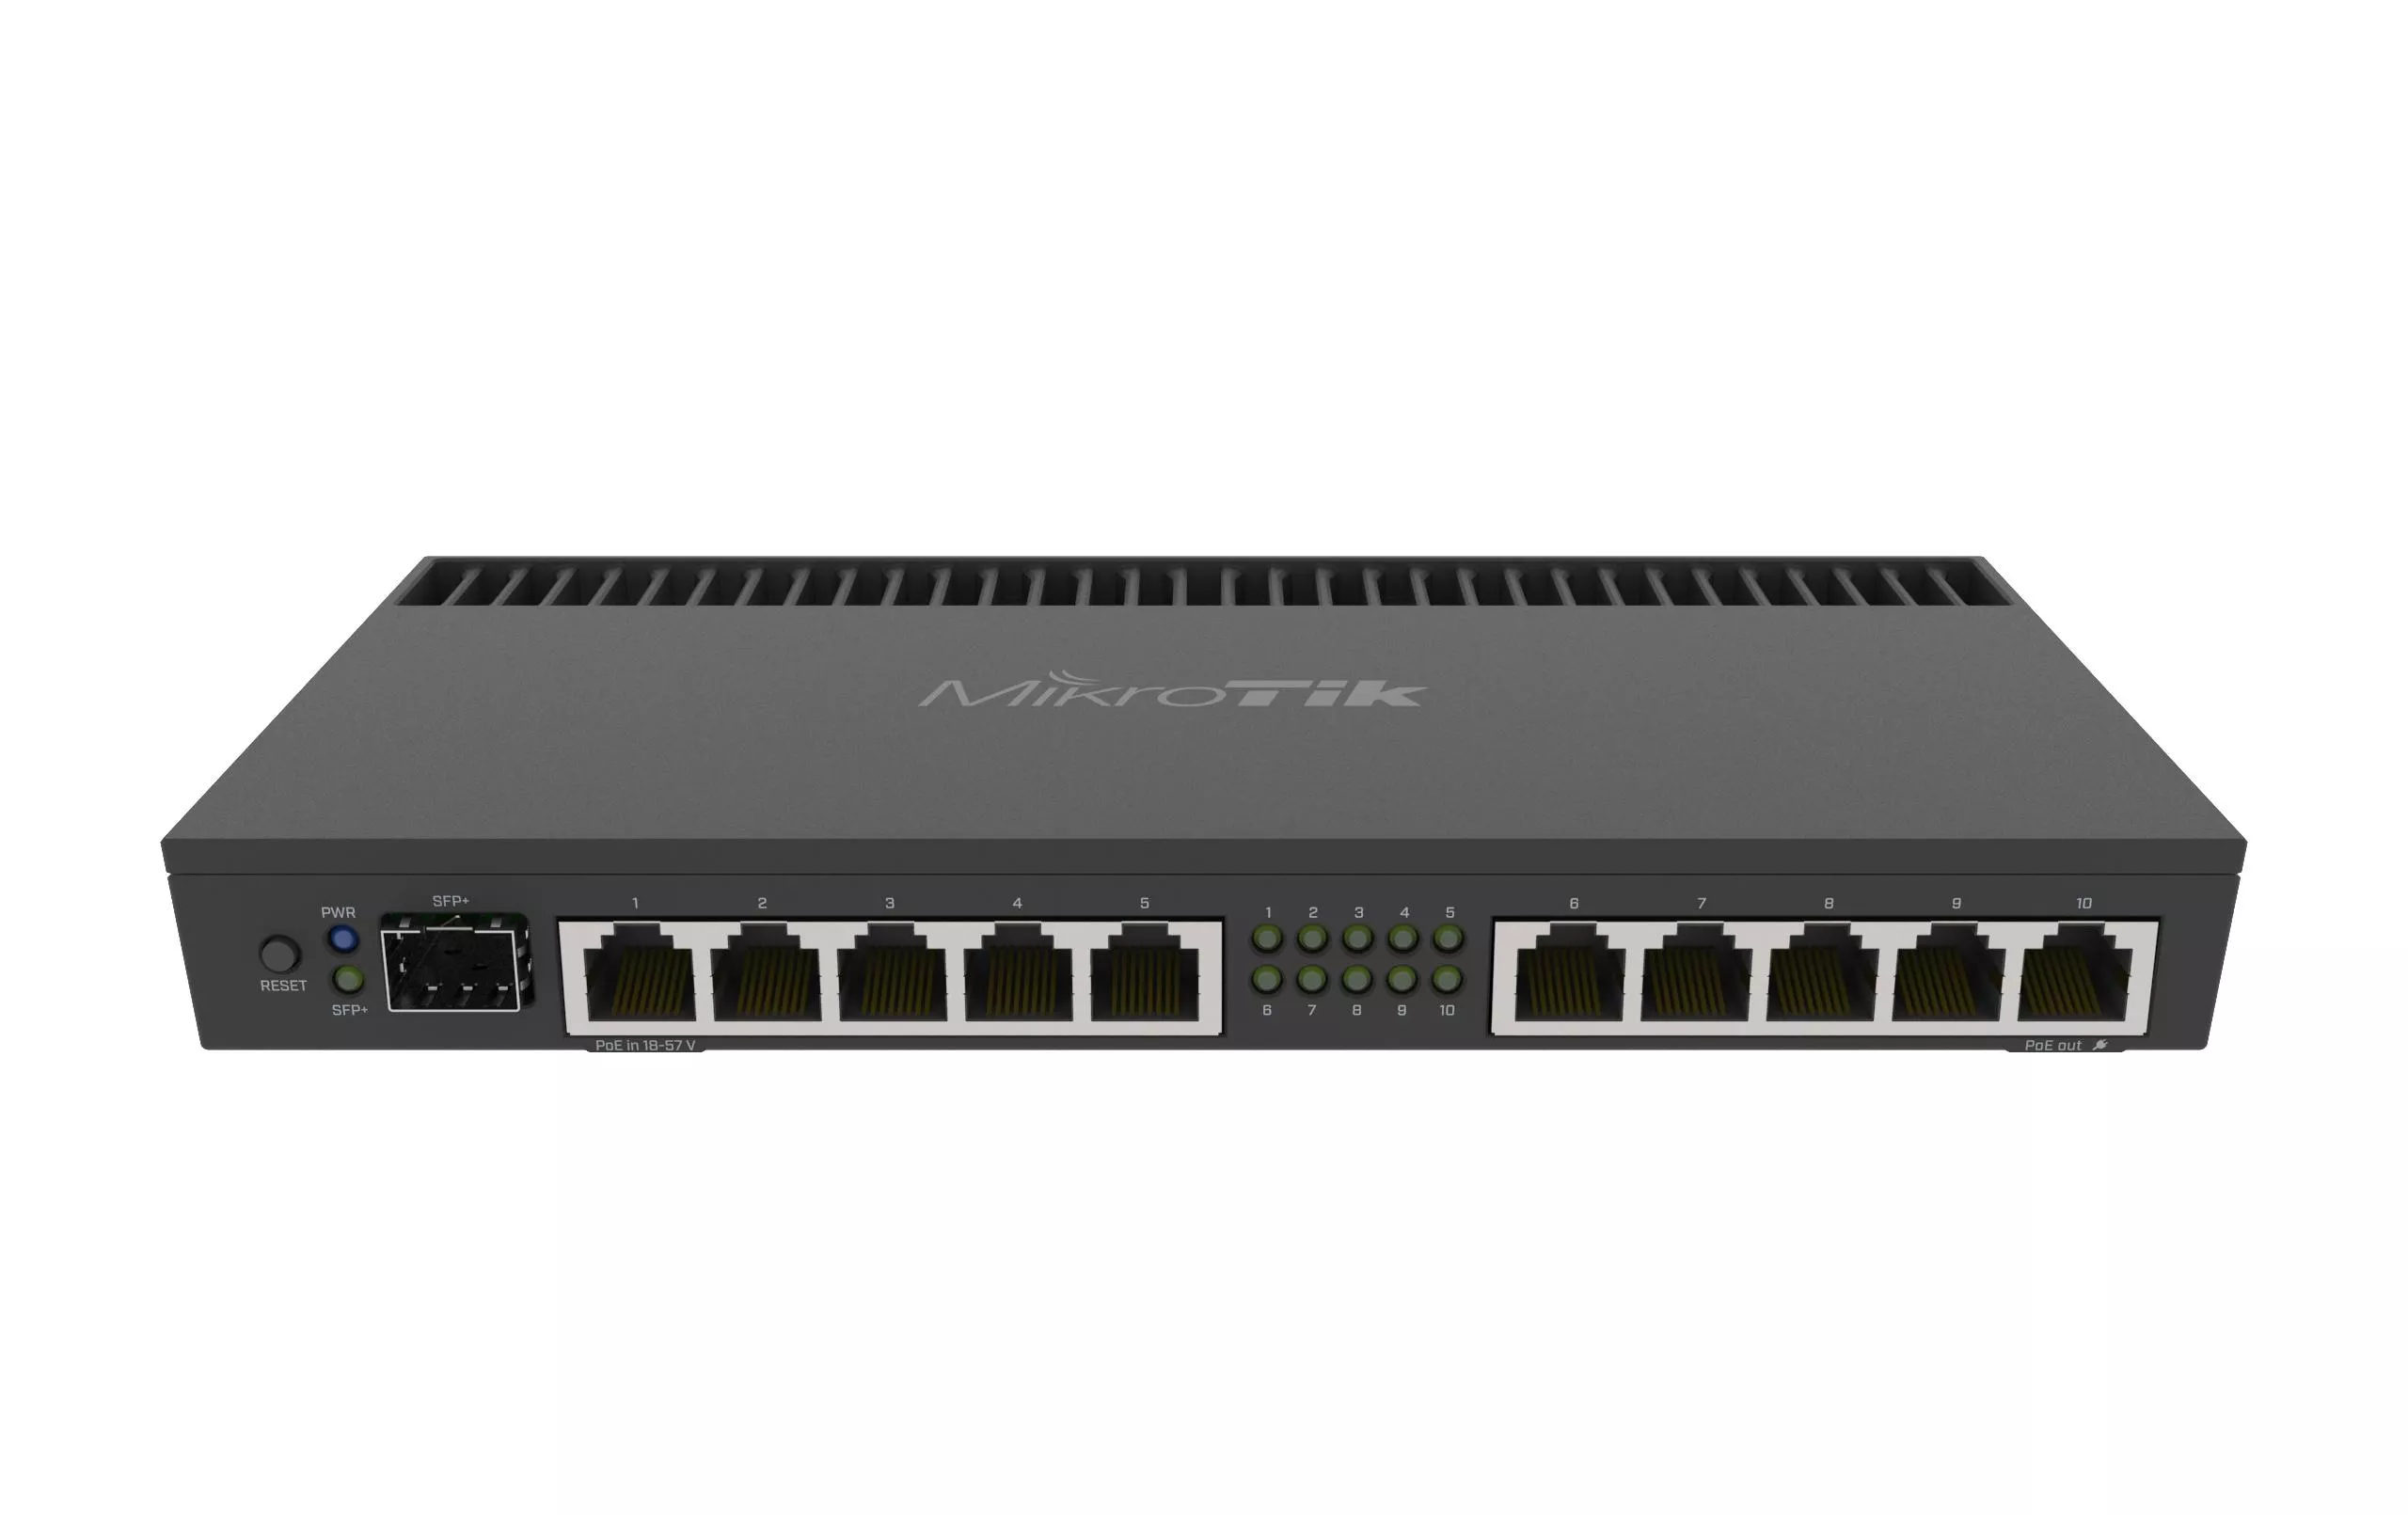 Routeur VPN RB4011iGS+RM .10Gbps capable